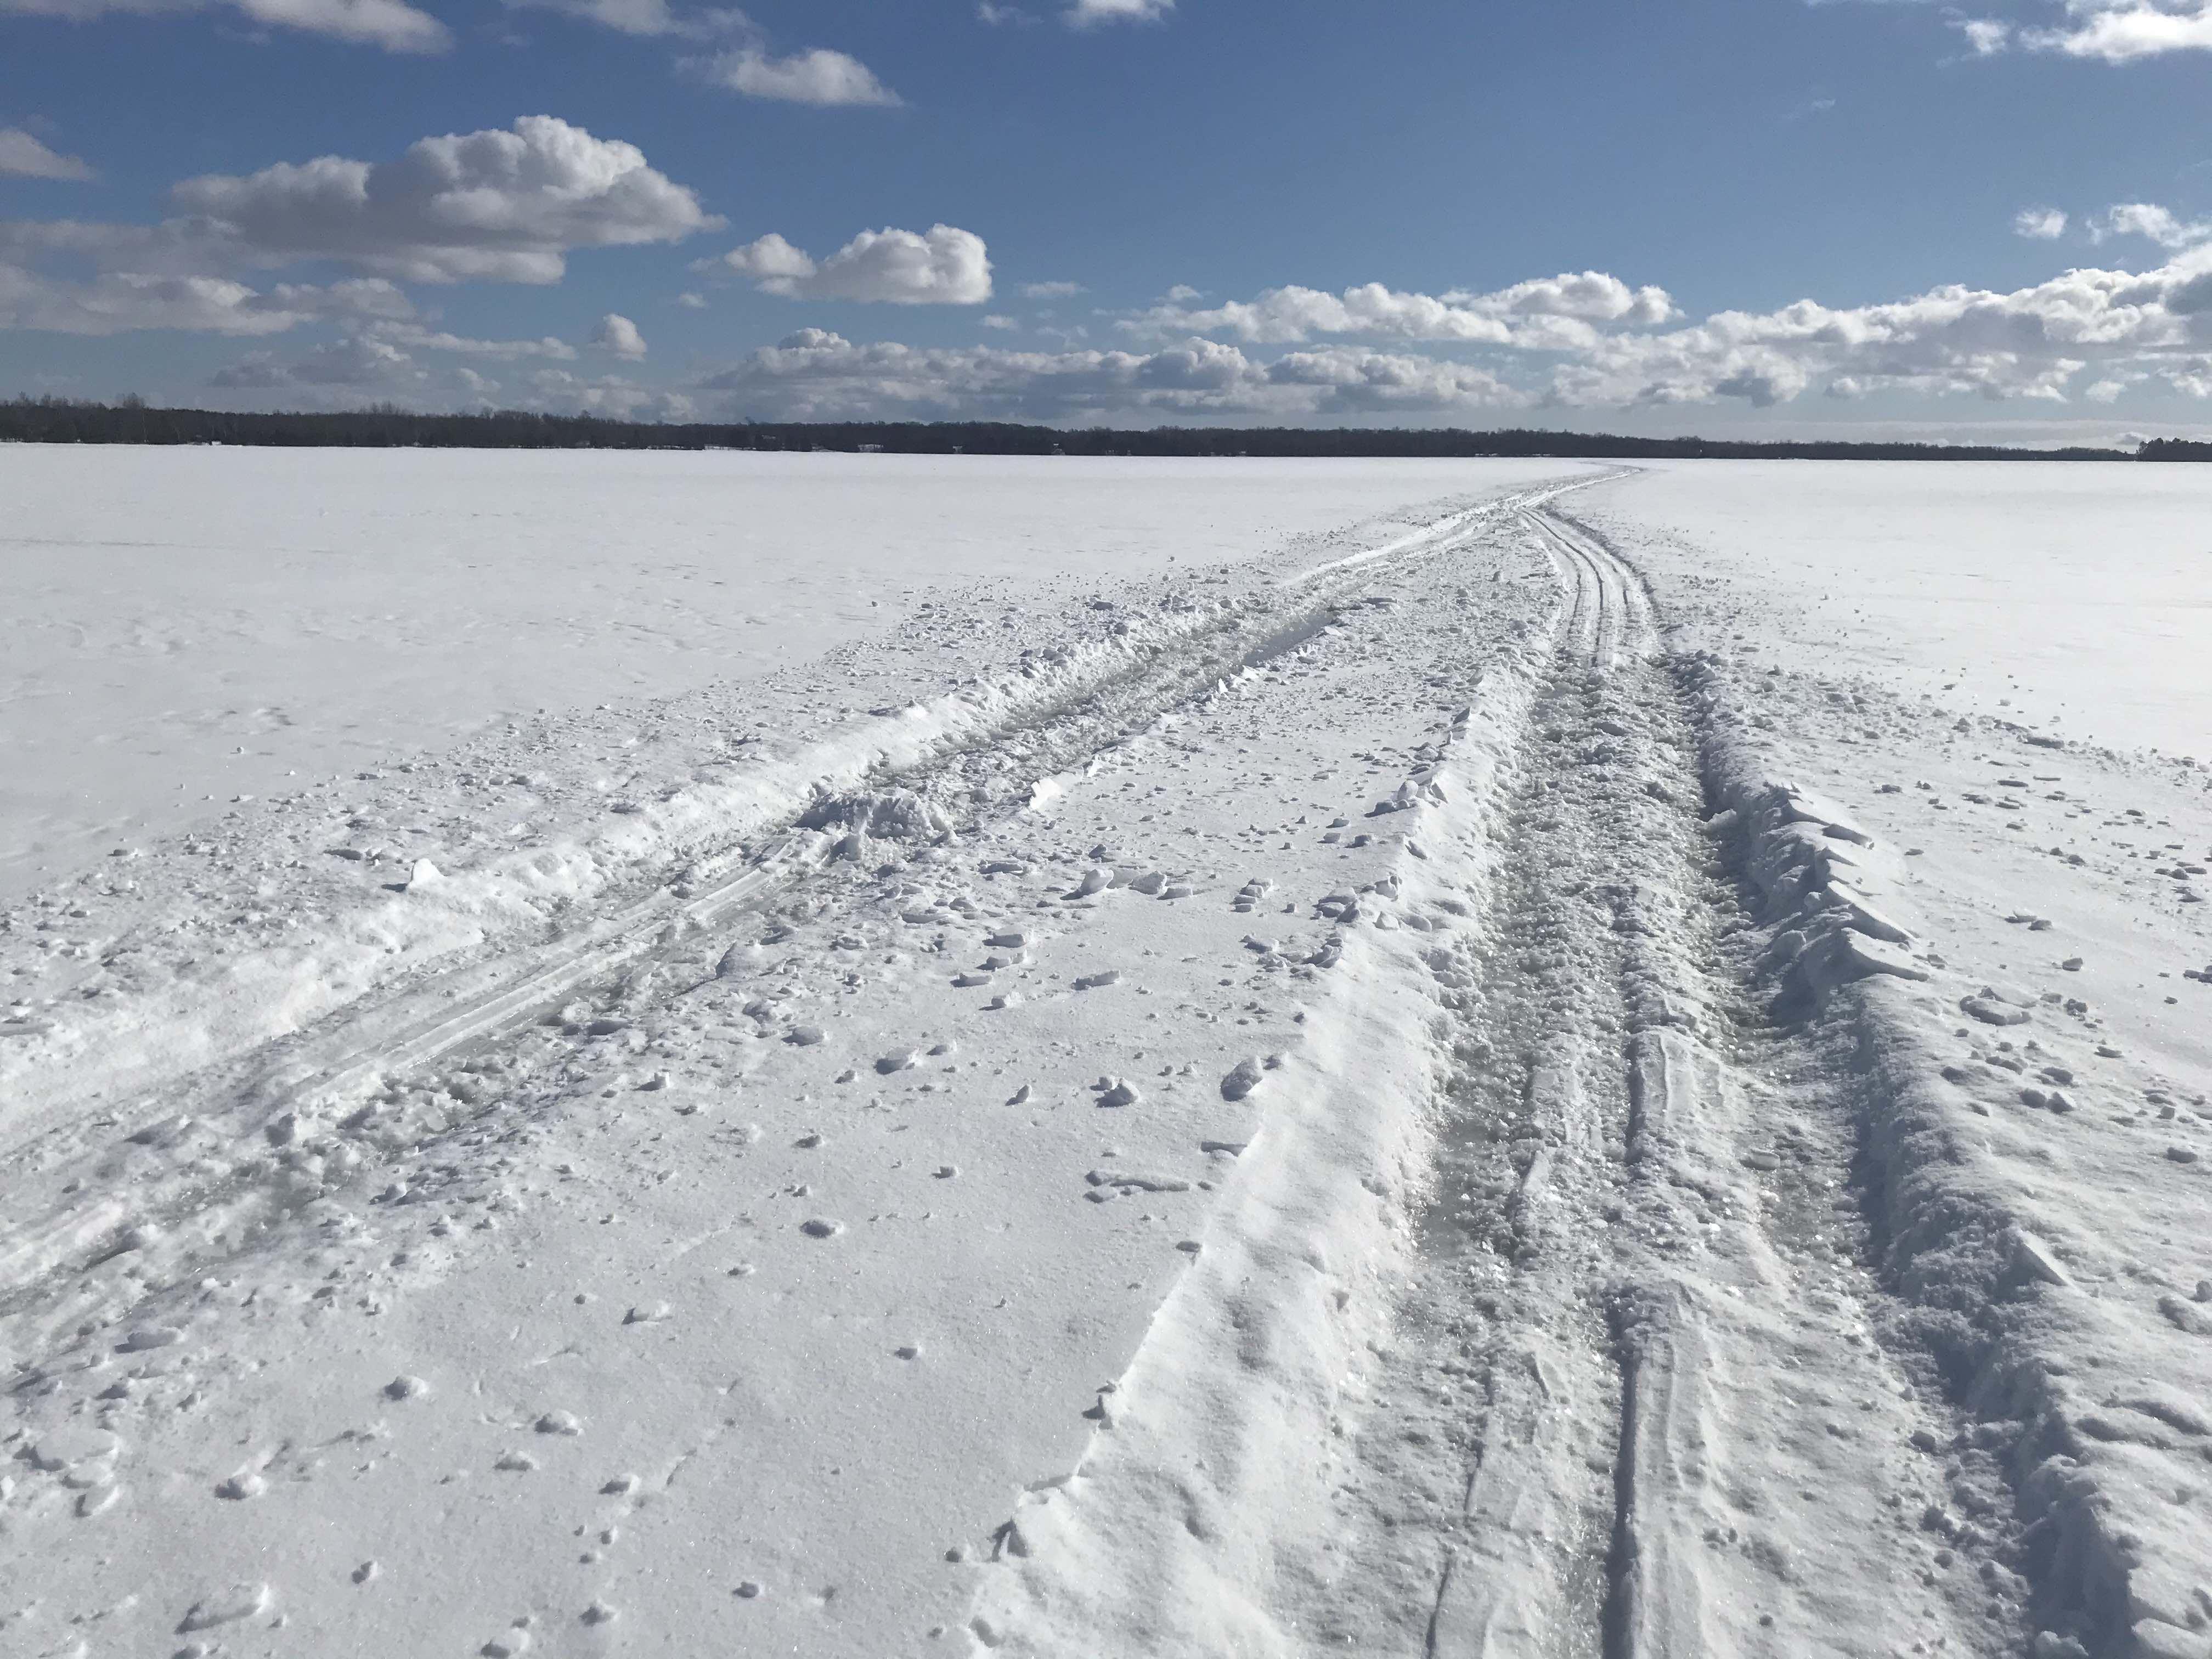 Skiing in snowmobile tracks on a frozen lake